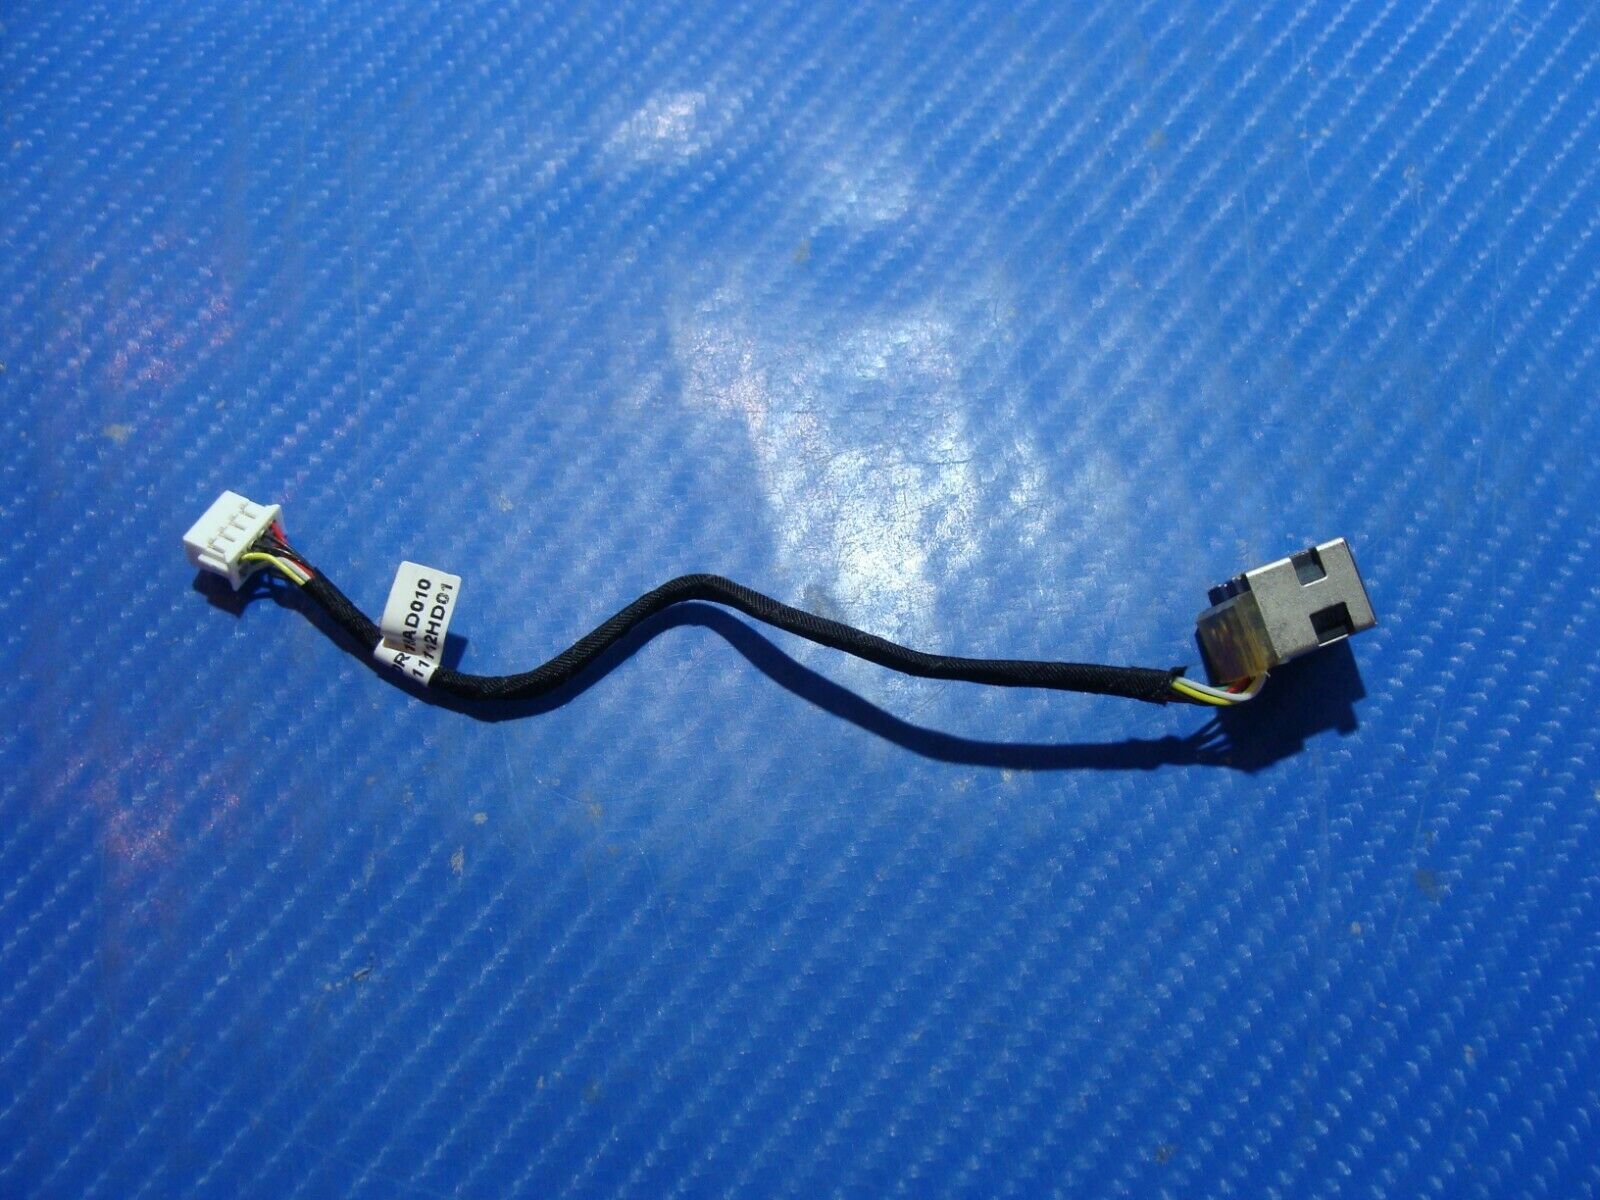 HP Pavilion g7-1261nr 17.3" Genuine Laptop DC IN Power Jack w/Cable DD0R18AD010 HP